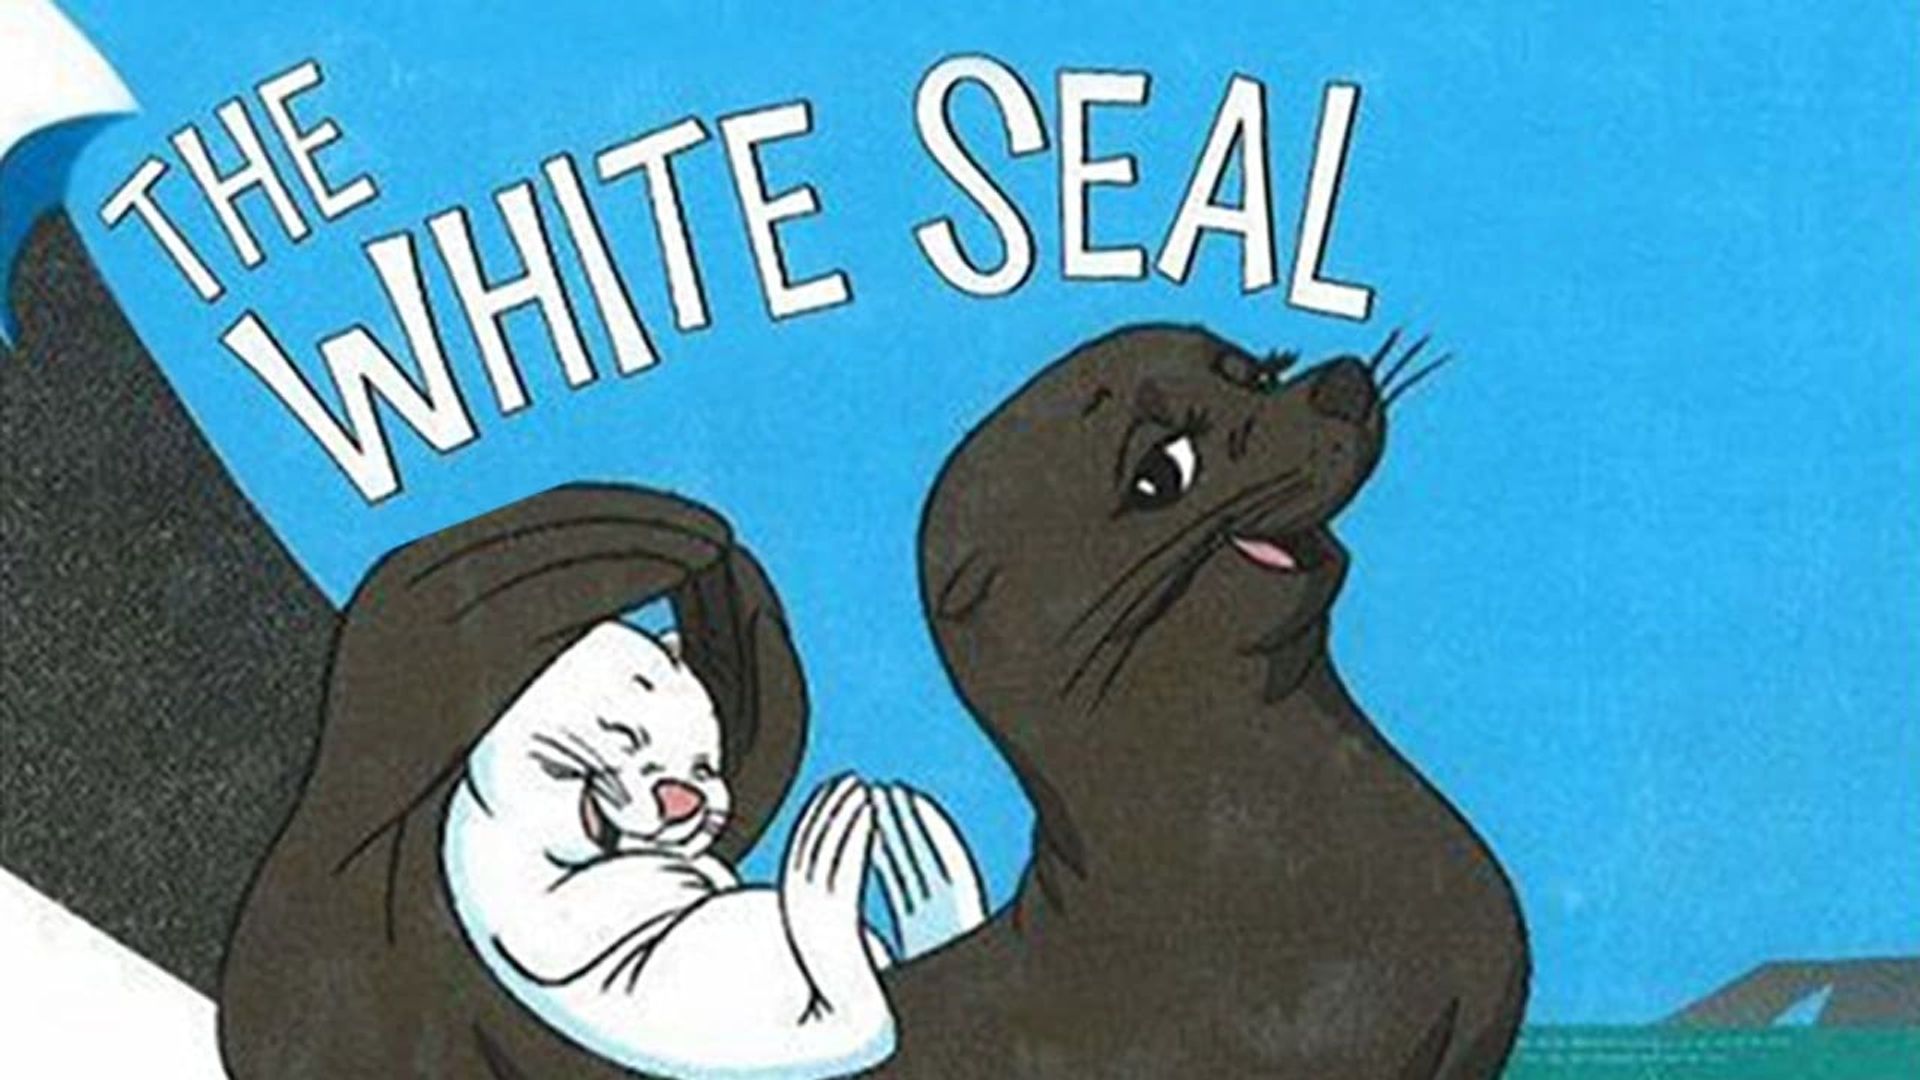 The White Seal background